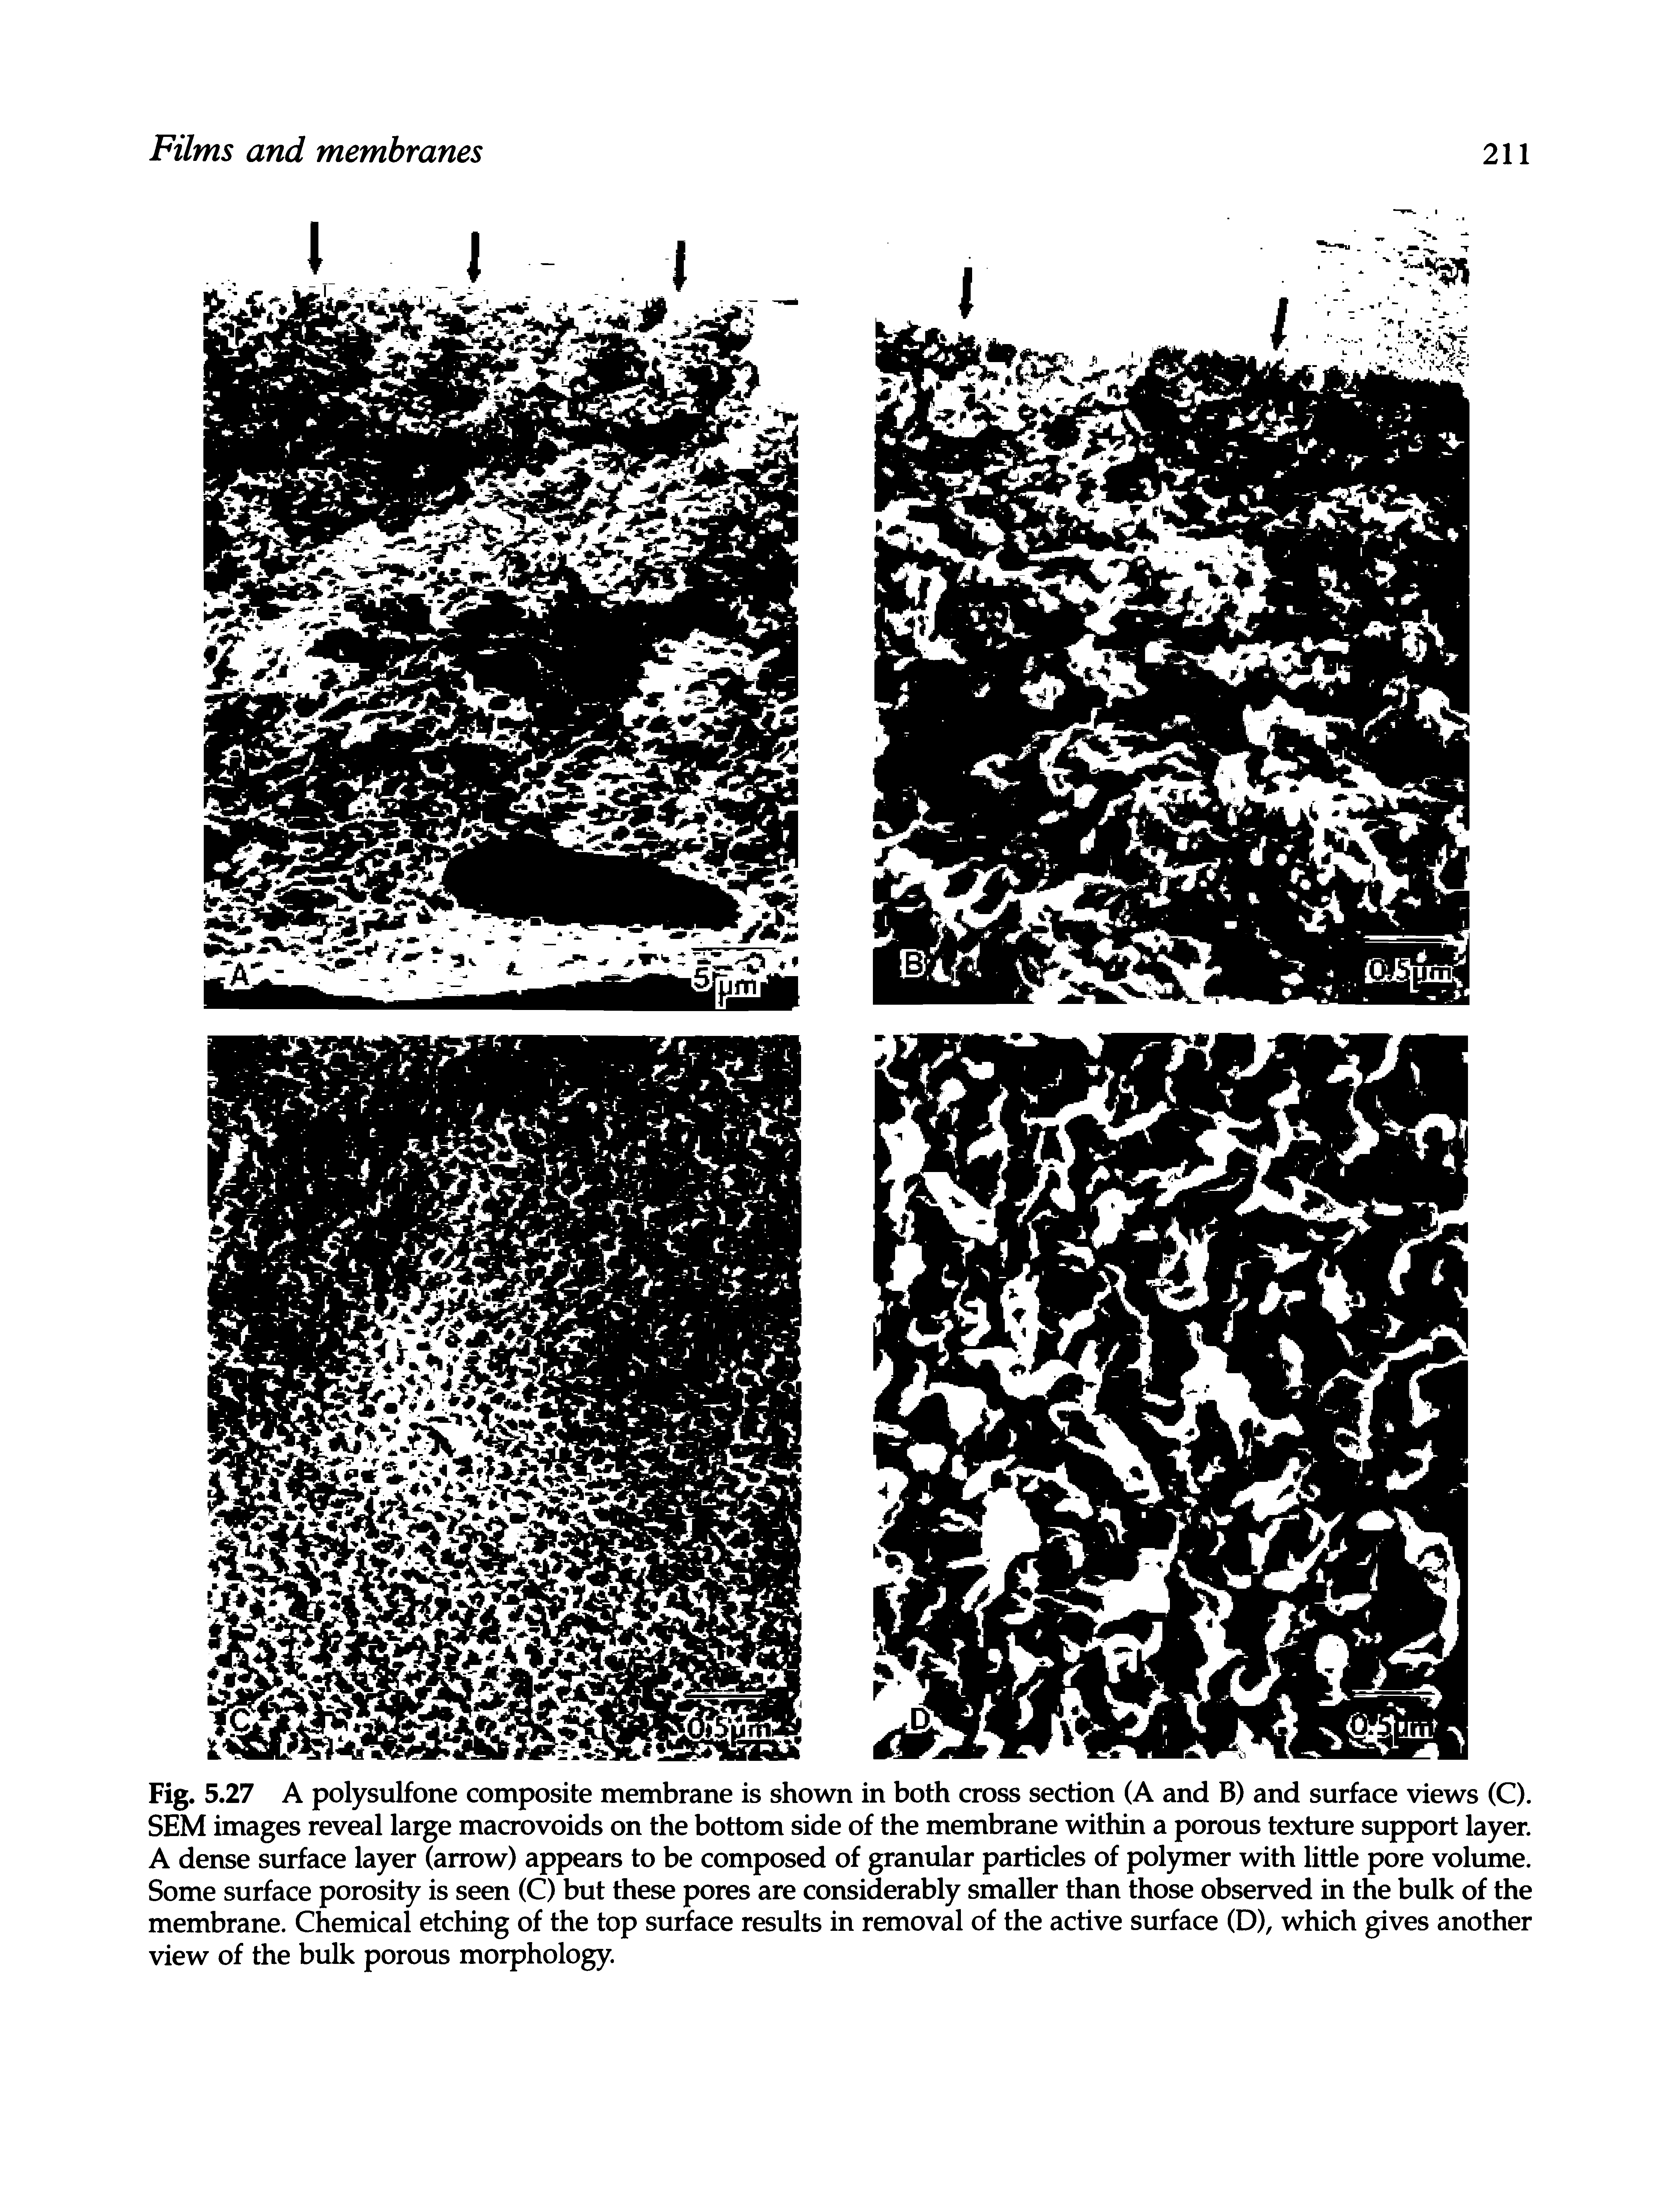 Fig. 5.27 A polysulfone composite membrane is shown in both cross section (A and B) and surface views (C). SEM images reveal large macrovoids on the bottom side of the membrane within a porous texture support layer. A dense surface layer (arrow) appears to be composed of granular particles of polymer with little pore volume. Some surface porosity is seen (C) but these pores are considerably smaller than those observed in the bulk of the membrane. Chemical etching of the top surface results in removal of the active surface (D), which gives another view of the bulk porous morphology.